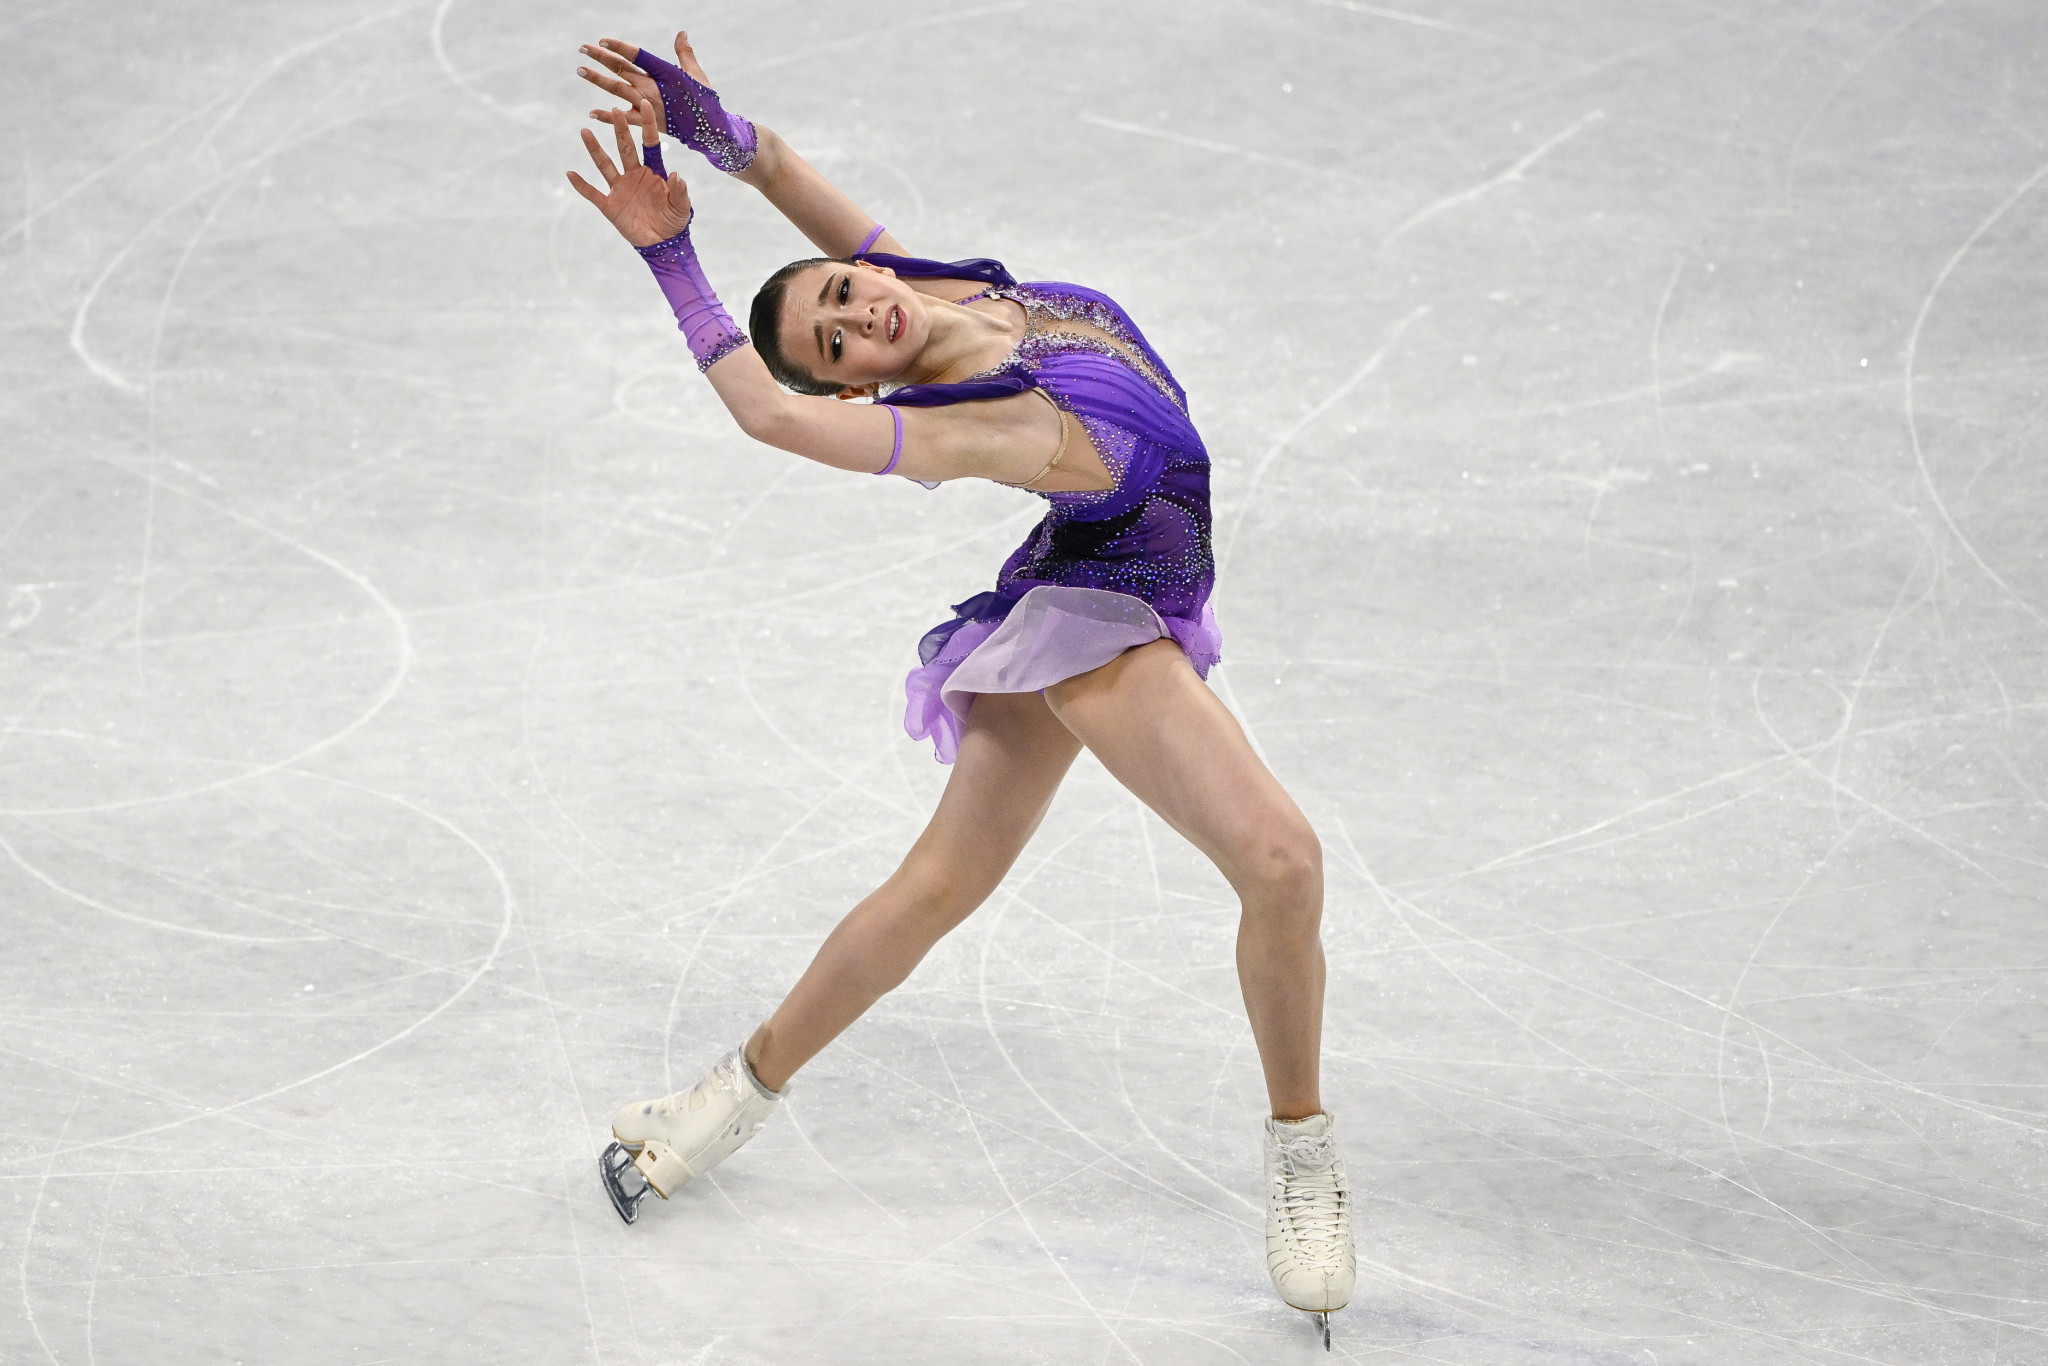 Kamila Valieva has competed for the first time since the Beijing 2022 Winter Olympics ©Getty Images